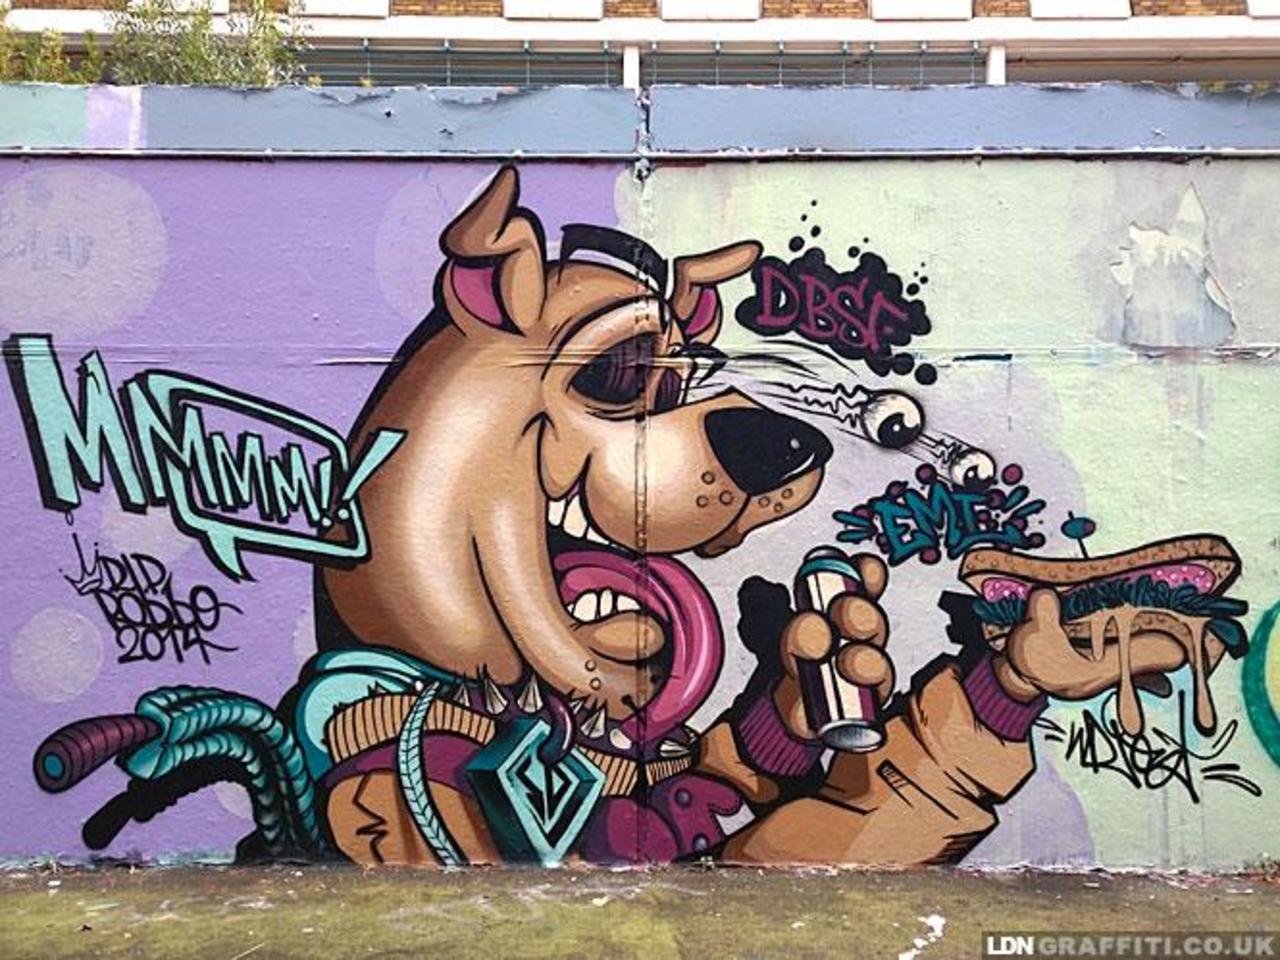 #ScoobyDoo #Graffiti #Art by Wrist at Stockwell #HallOfFame in South London … http://t.co/0Vr5tSS4sh